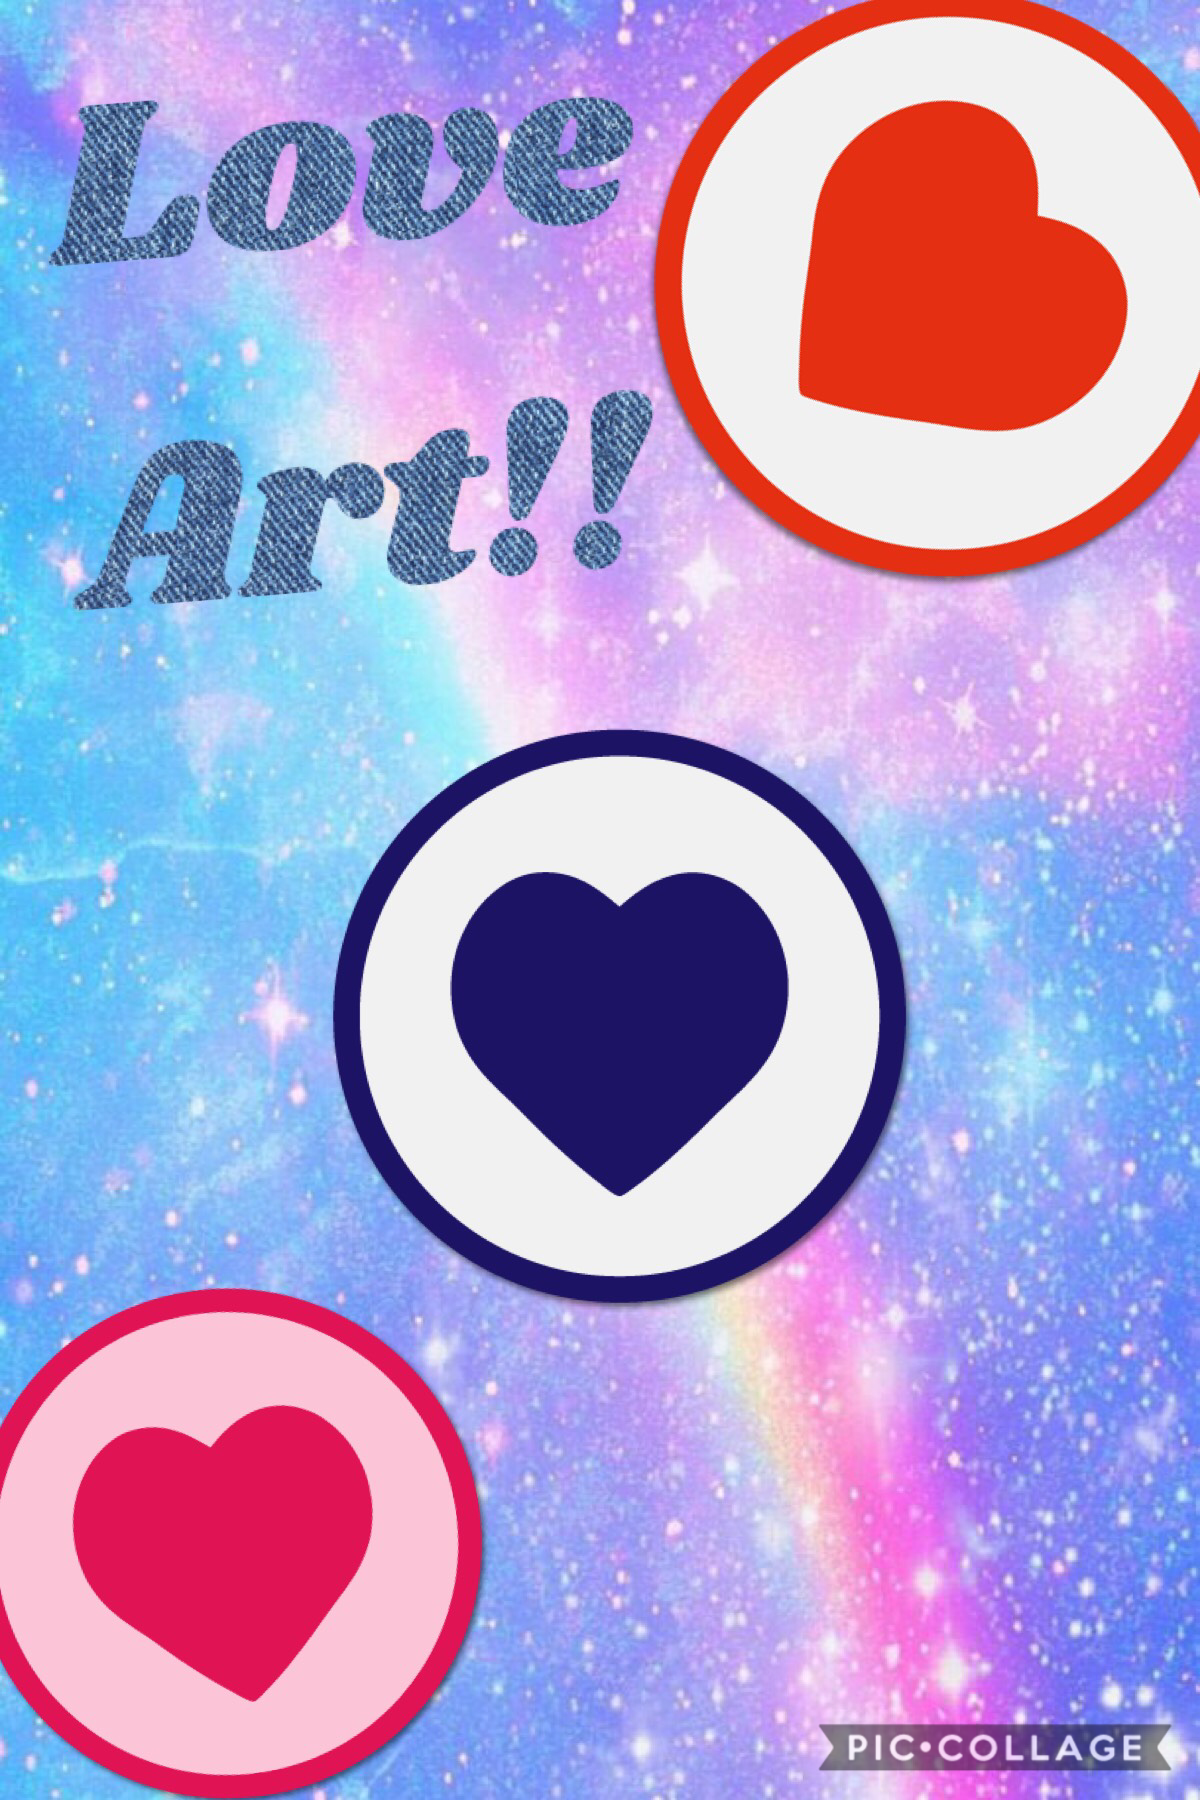 🎨Tap🎨
As You can see I LOVE art!If u wanna see some of my art comment “🎨” 